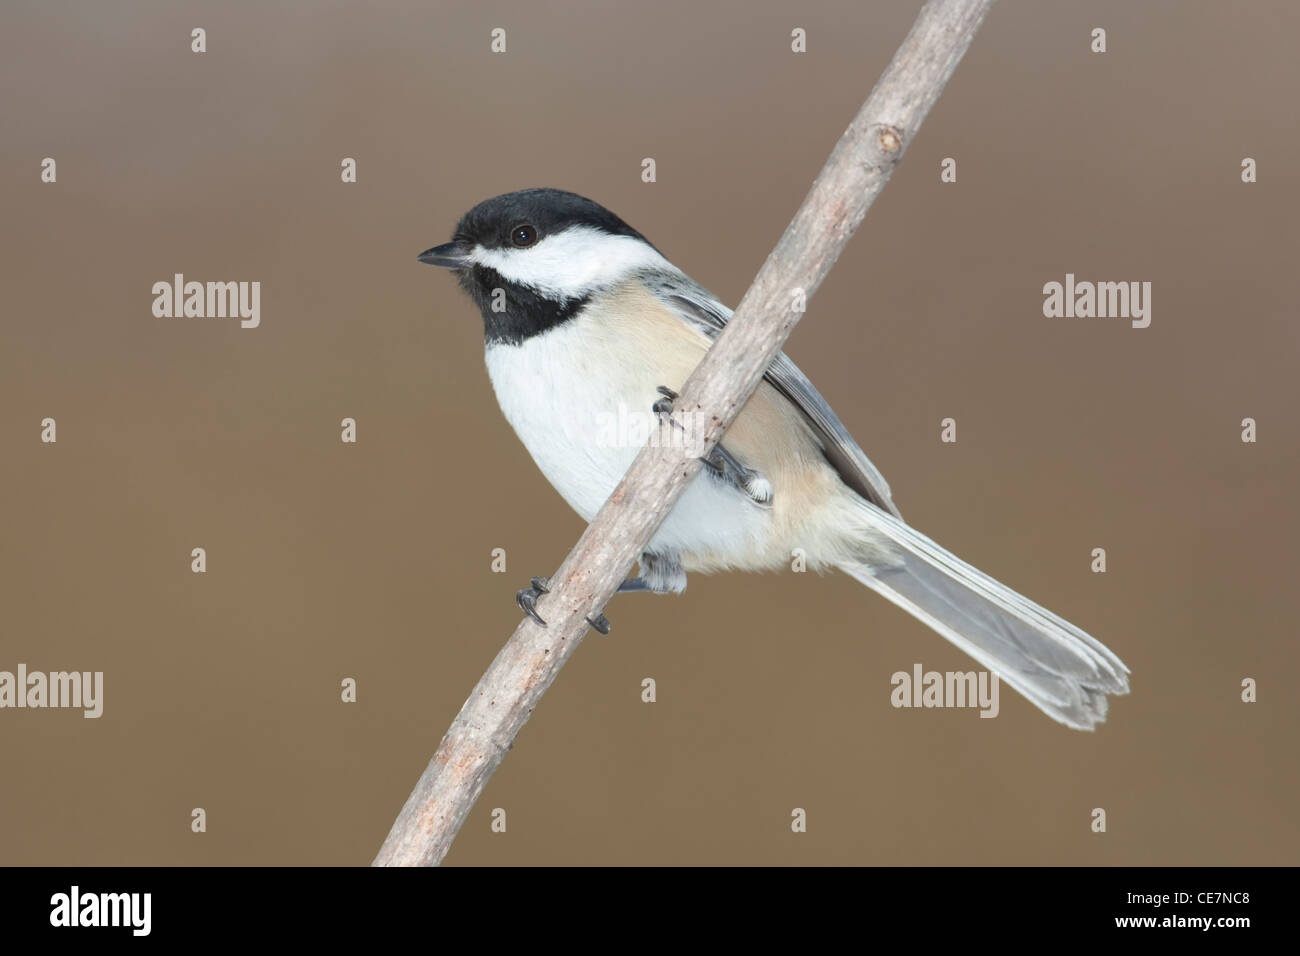 Black-capped Chickadee (Poecile atricapillus) perched on a tree limb Stock Photo